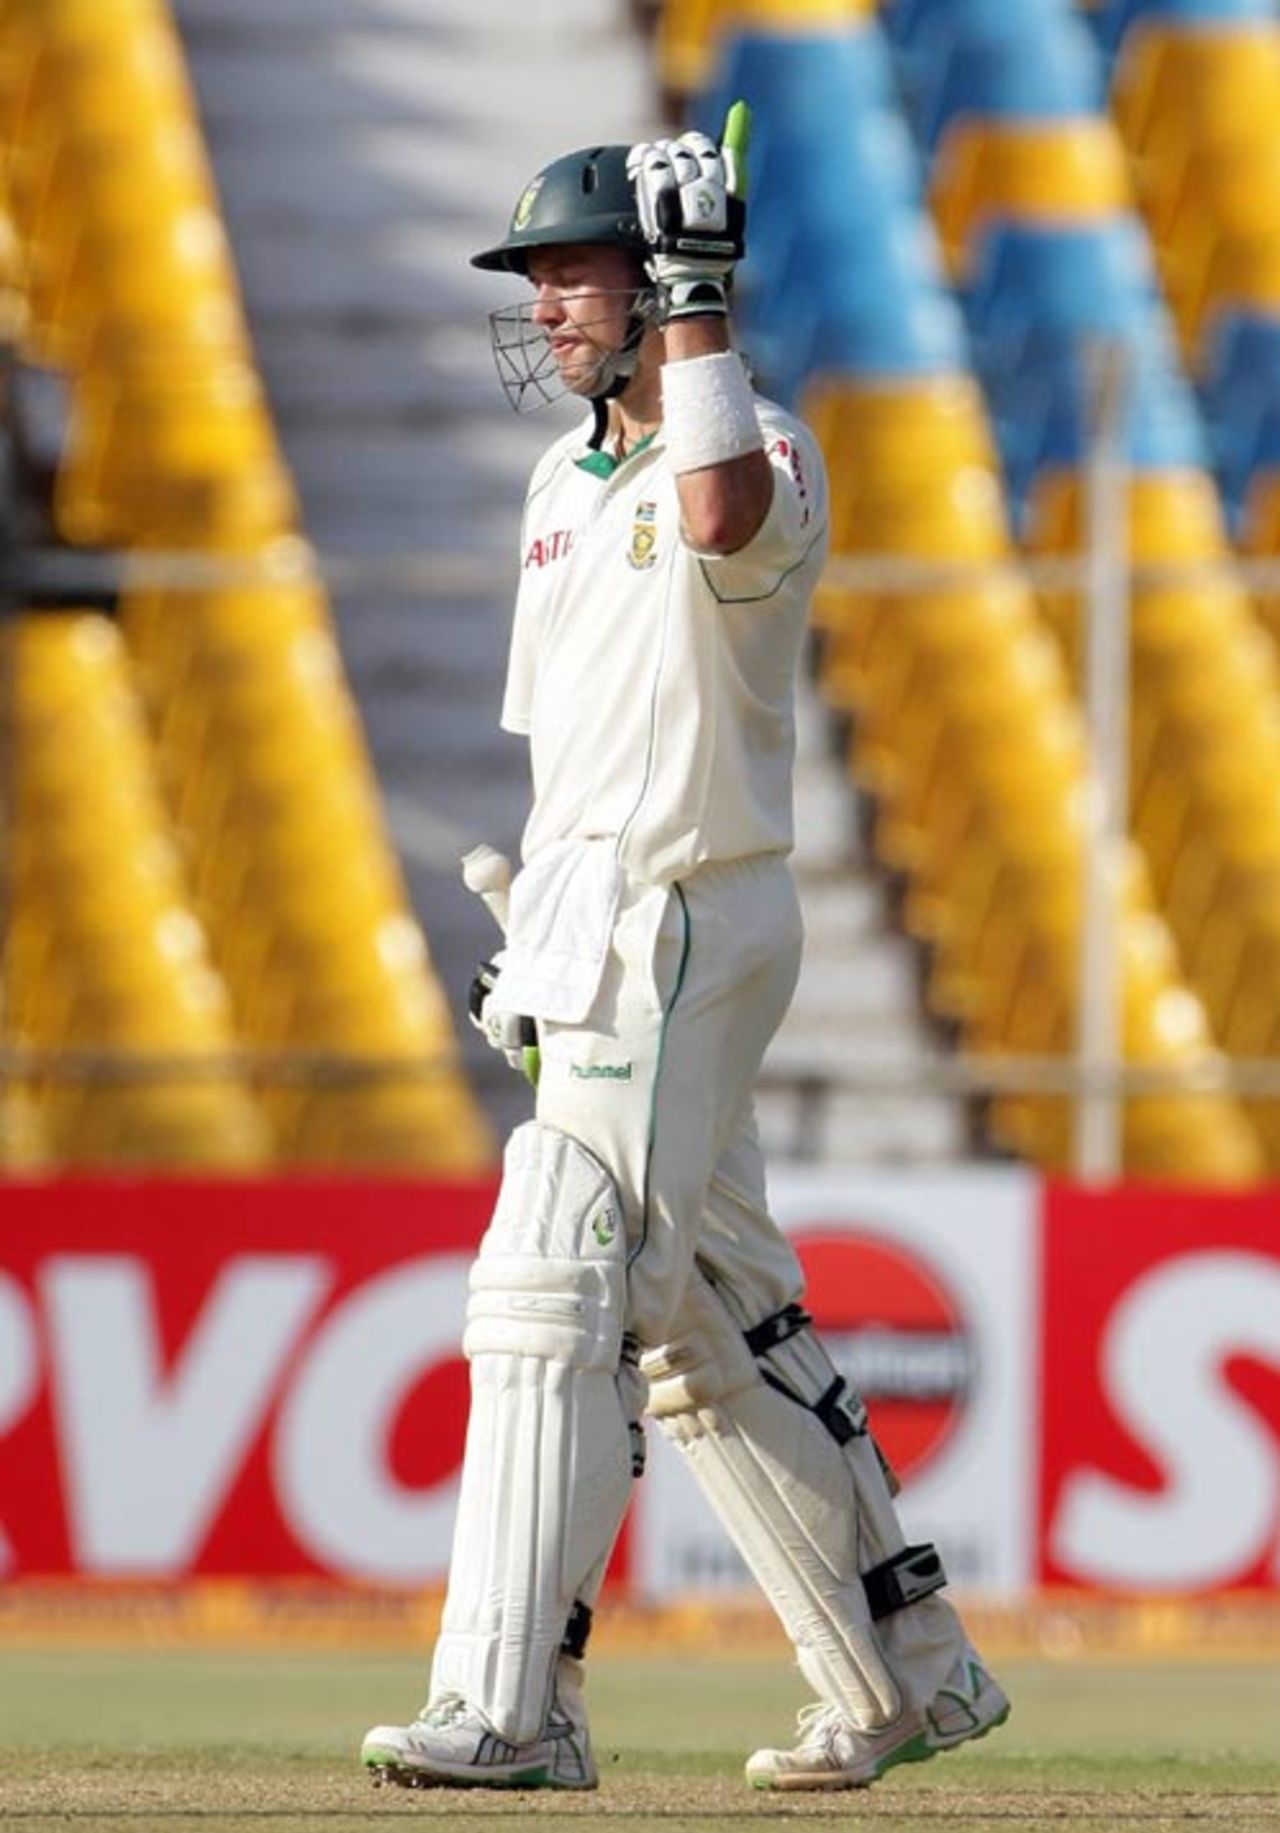 AB de Villiers brings up his half-century , India v South Africa, 2nd Test, Ahmedabad, 1st day, April 3, 2008